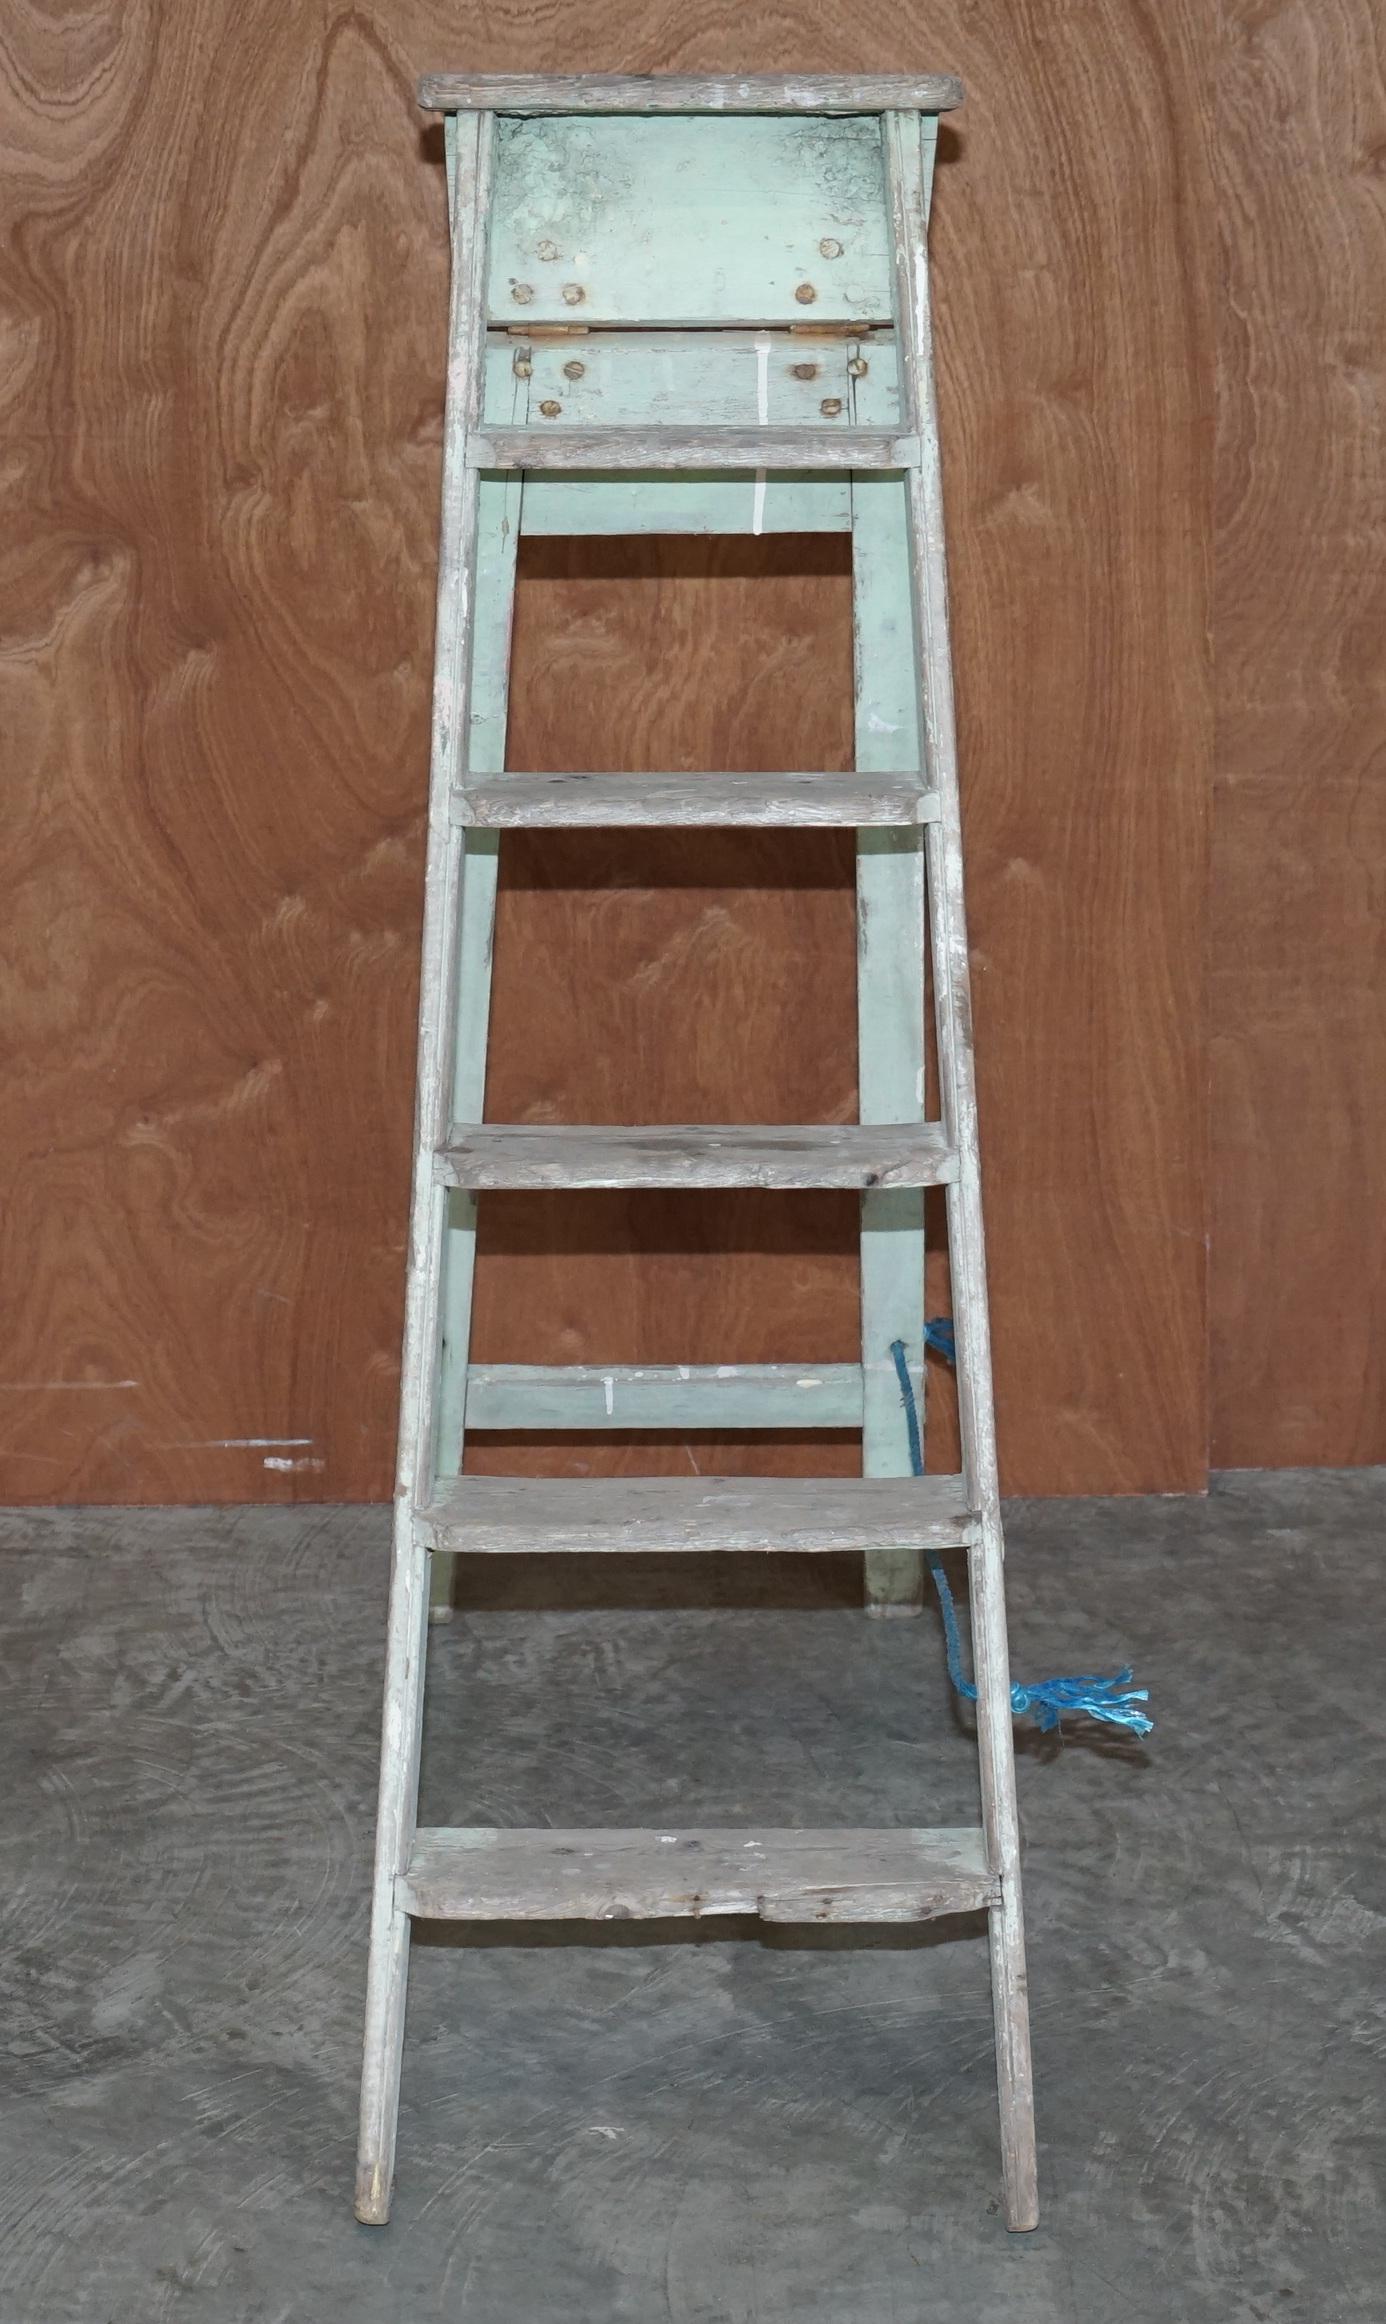 We are delighted to offer this lovely original circa 1910-1920 pine painted library steps or ladder which is stamped G.R.D.C

A good looking and decorative piece, originally made for estate decorators, I'm not sure what the stamps relate to, GR is